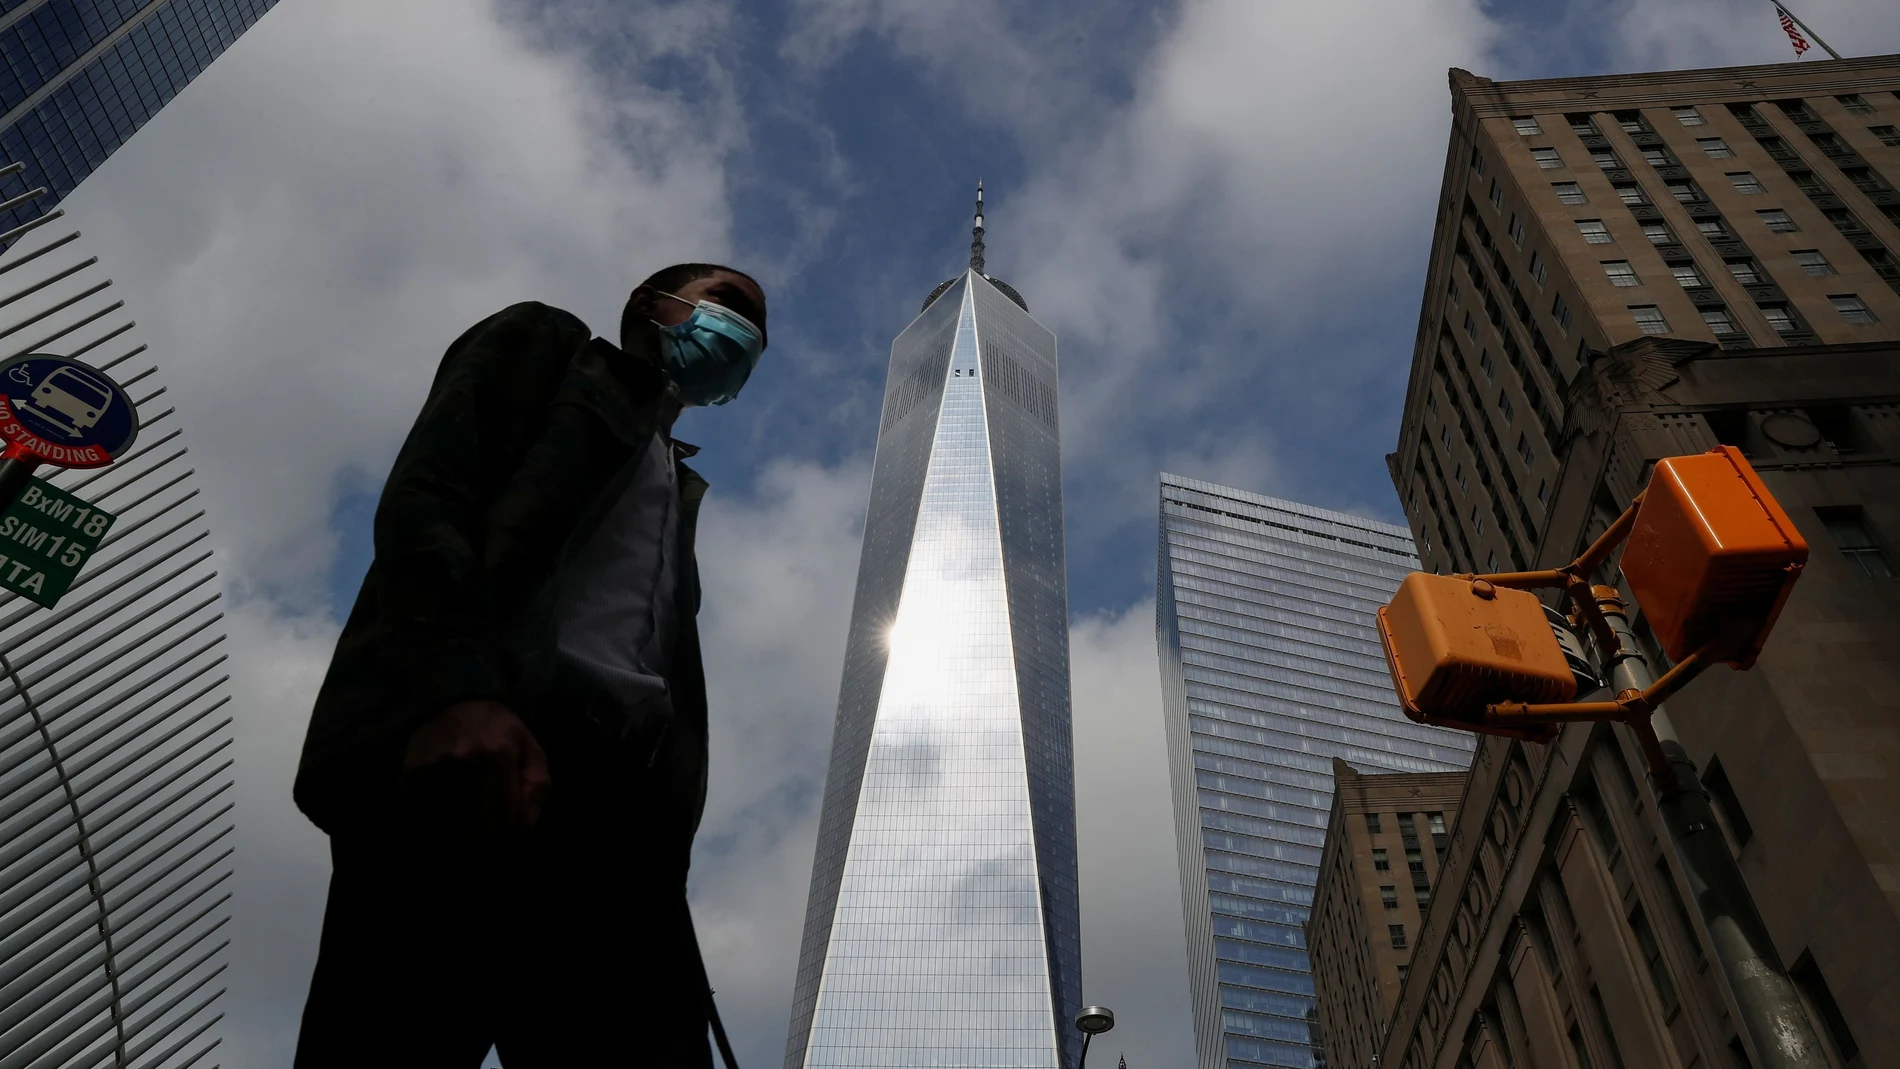 A man wearing a protective face mask walks by One World Trade Center two days before the 19th anniversary of the 9/11 attacks, amid the coronavirus disease (COVID-19) pandemic, in the lower section Manhattan, New York City